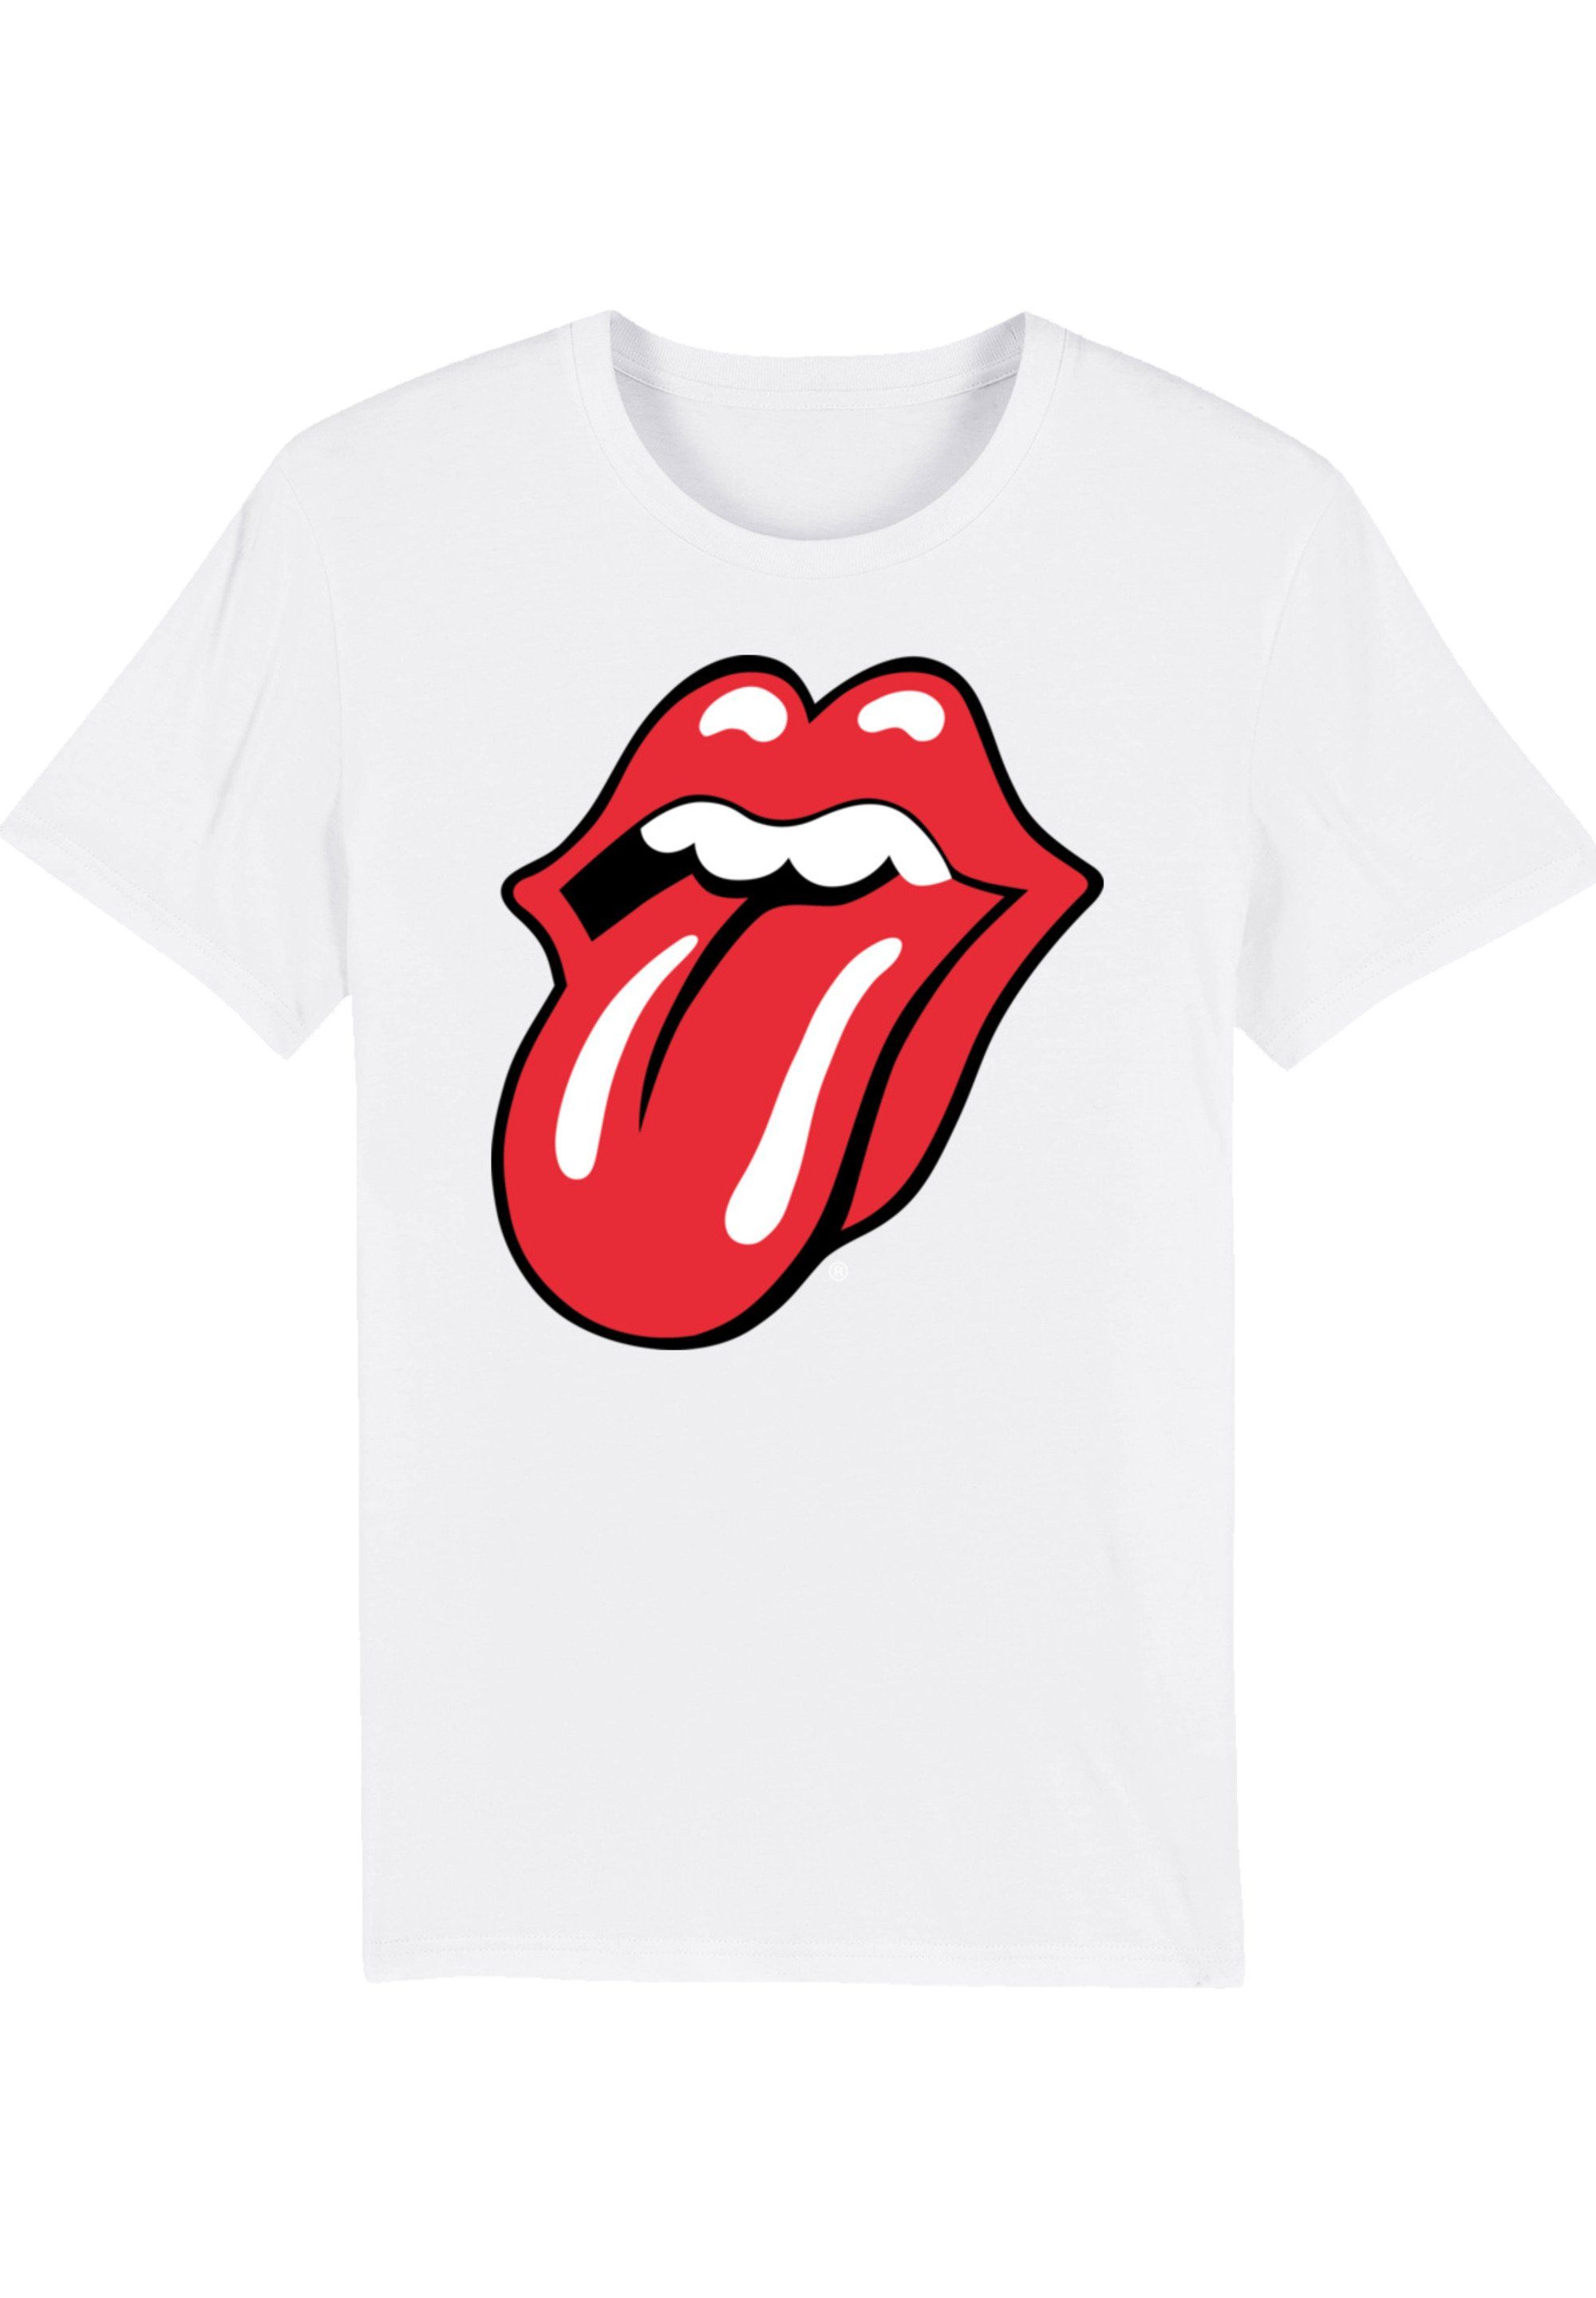 weiß Zunge The T-Shirt Print Stones F4NT4STIC Rote Rolling